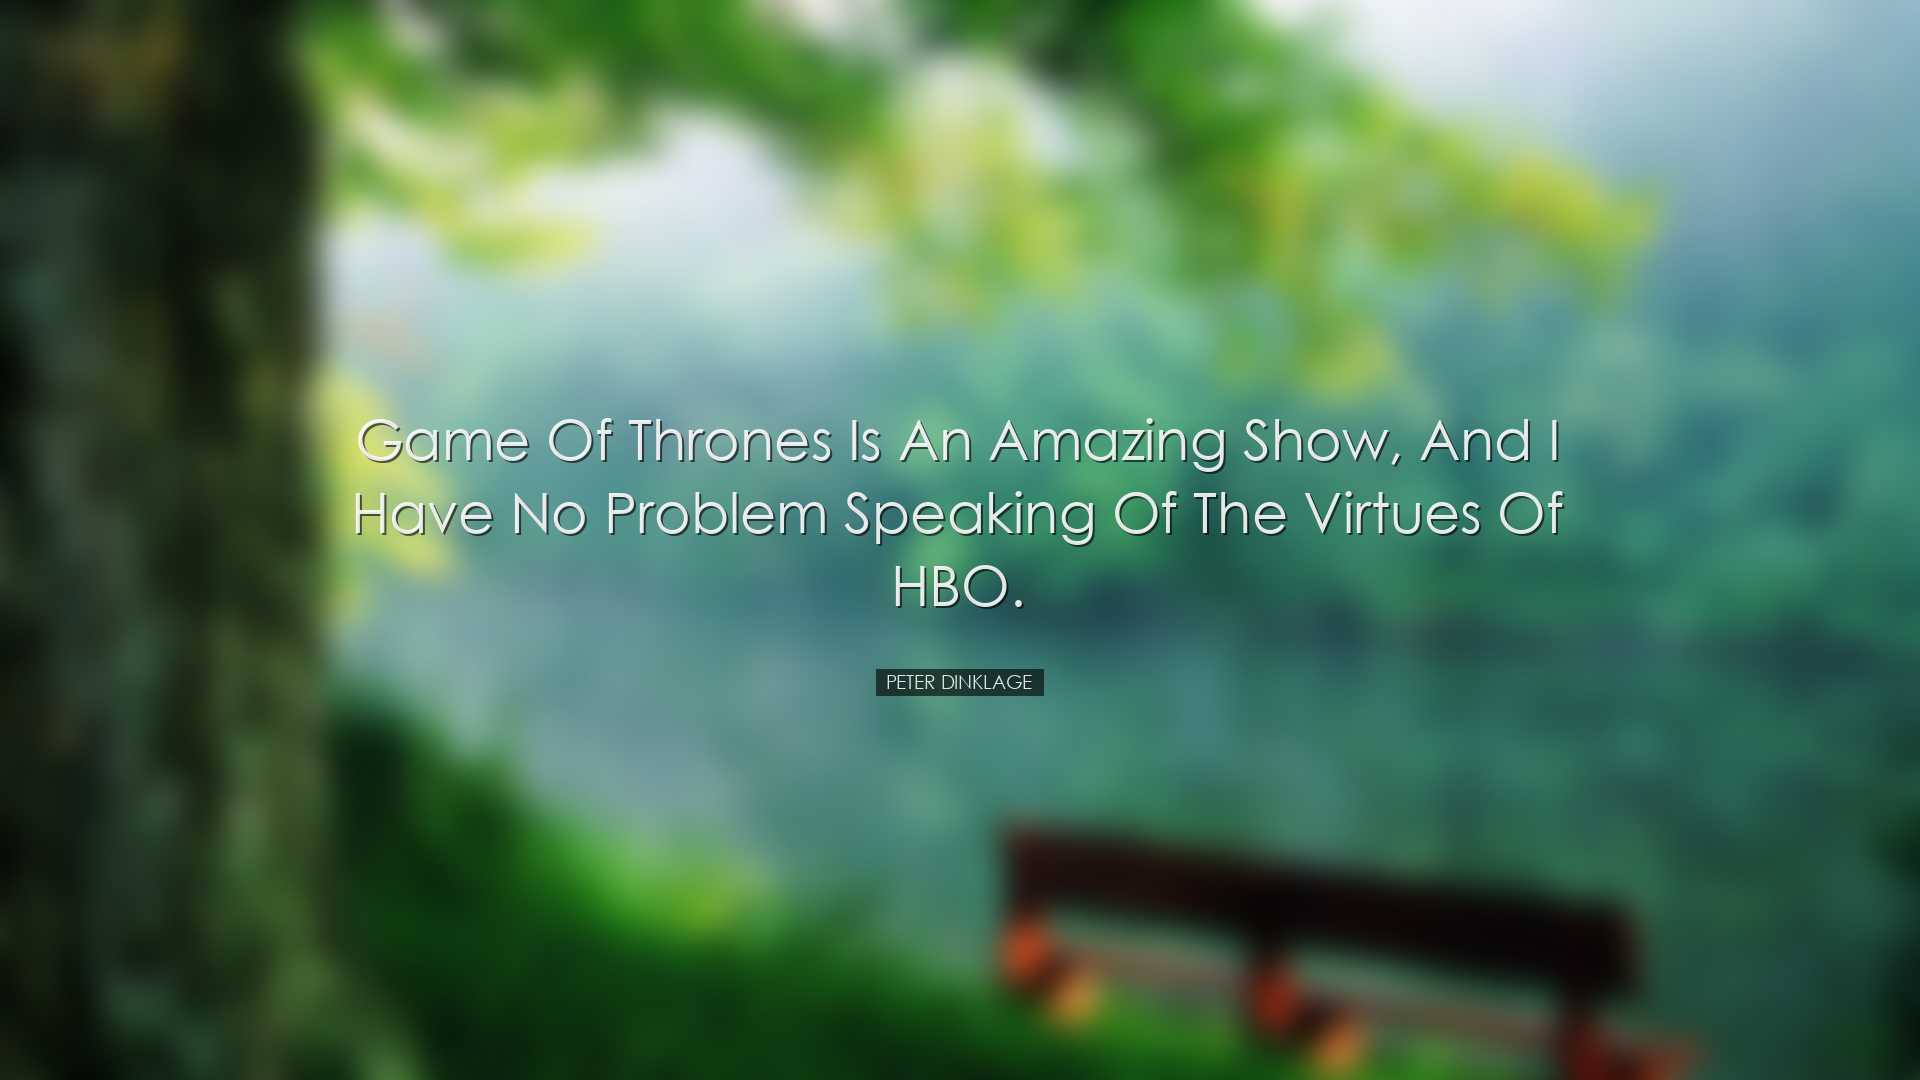 Game of Thrones is an amazing show, and I have no problem speaking